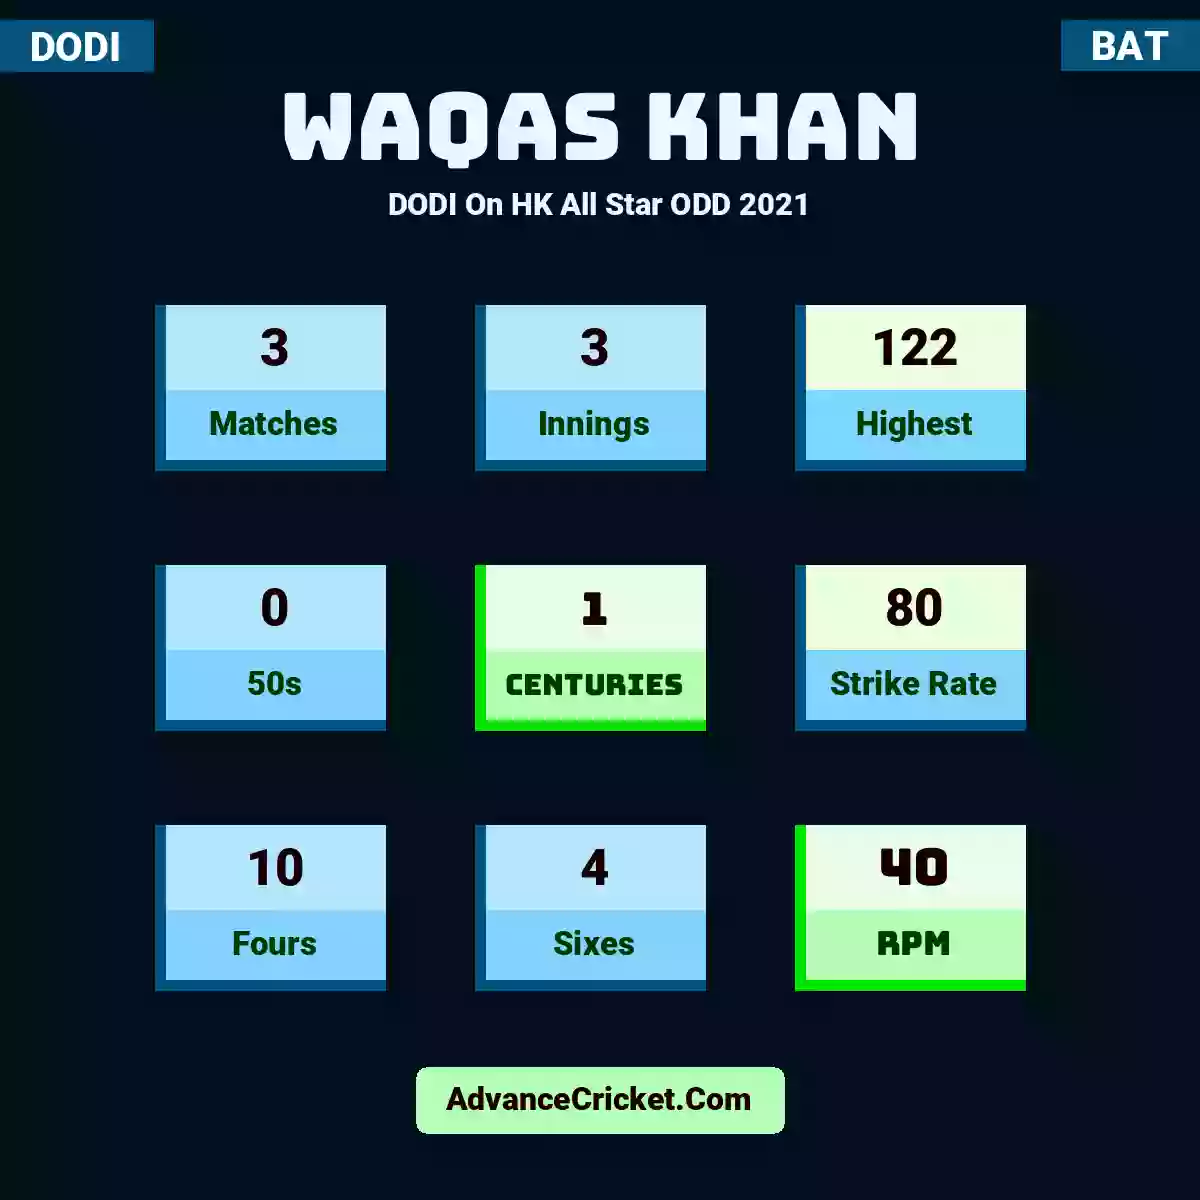 Waqas Khan DODI  On HK All Star ODD 2021, Waqas Khan played 3 matches, scored 122 runs as highest, 0 half-centuries, and 1 centuries, with a strike rate of 80. W.Khan hit 10 fours and 4 sixes, with an RPM of 40.